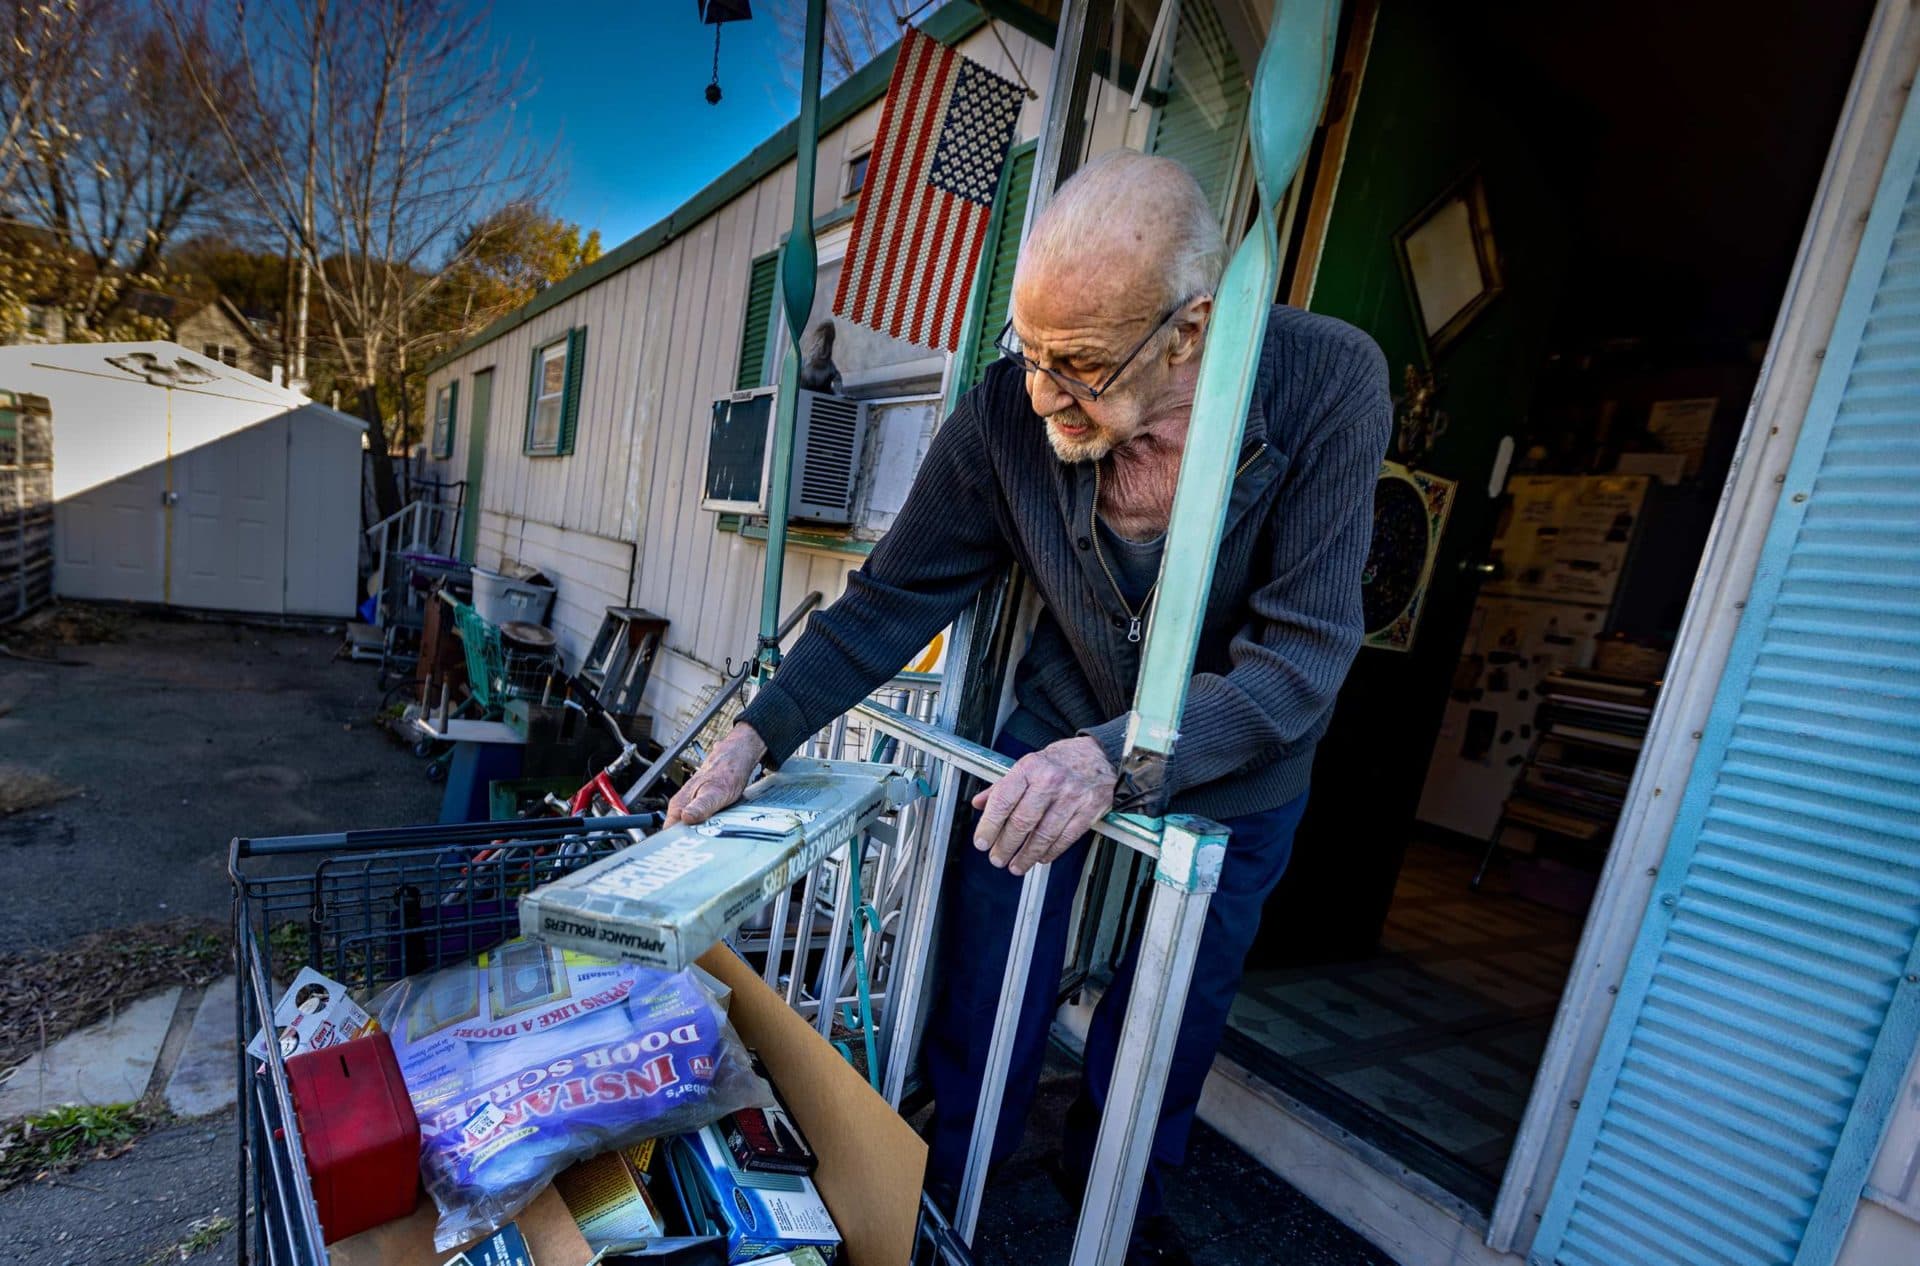 John Piazza places a box of appliance rollers into a shopping cart full of items to be thrown in the dumpster as he prepares to move out of his trailer in Revere. (Jesse Costa/WBUR)